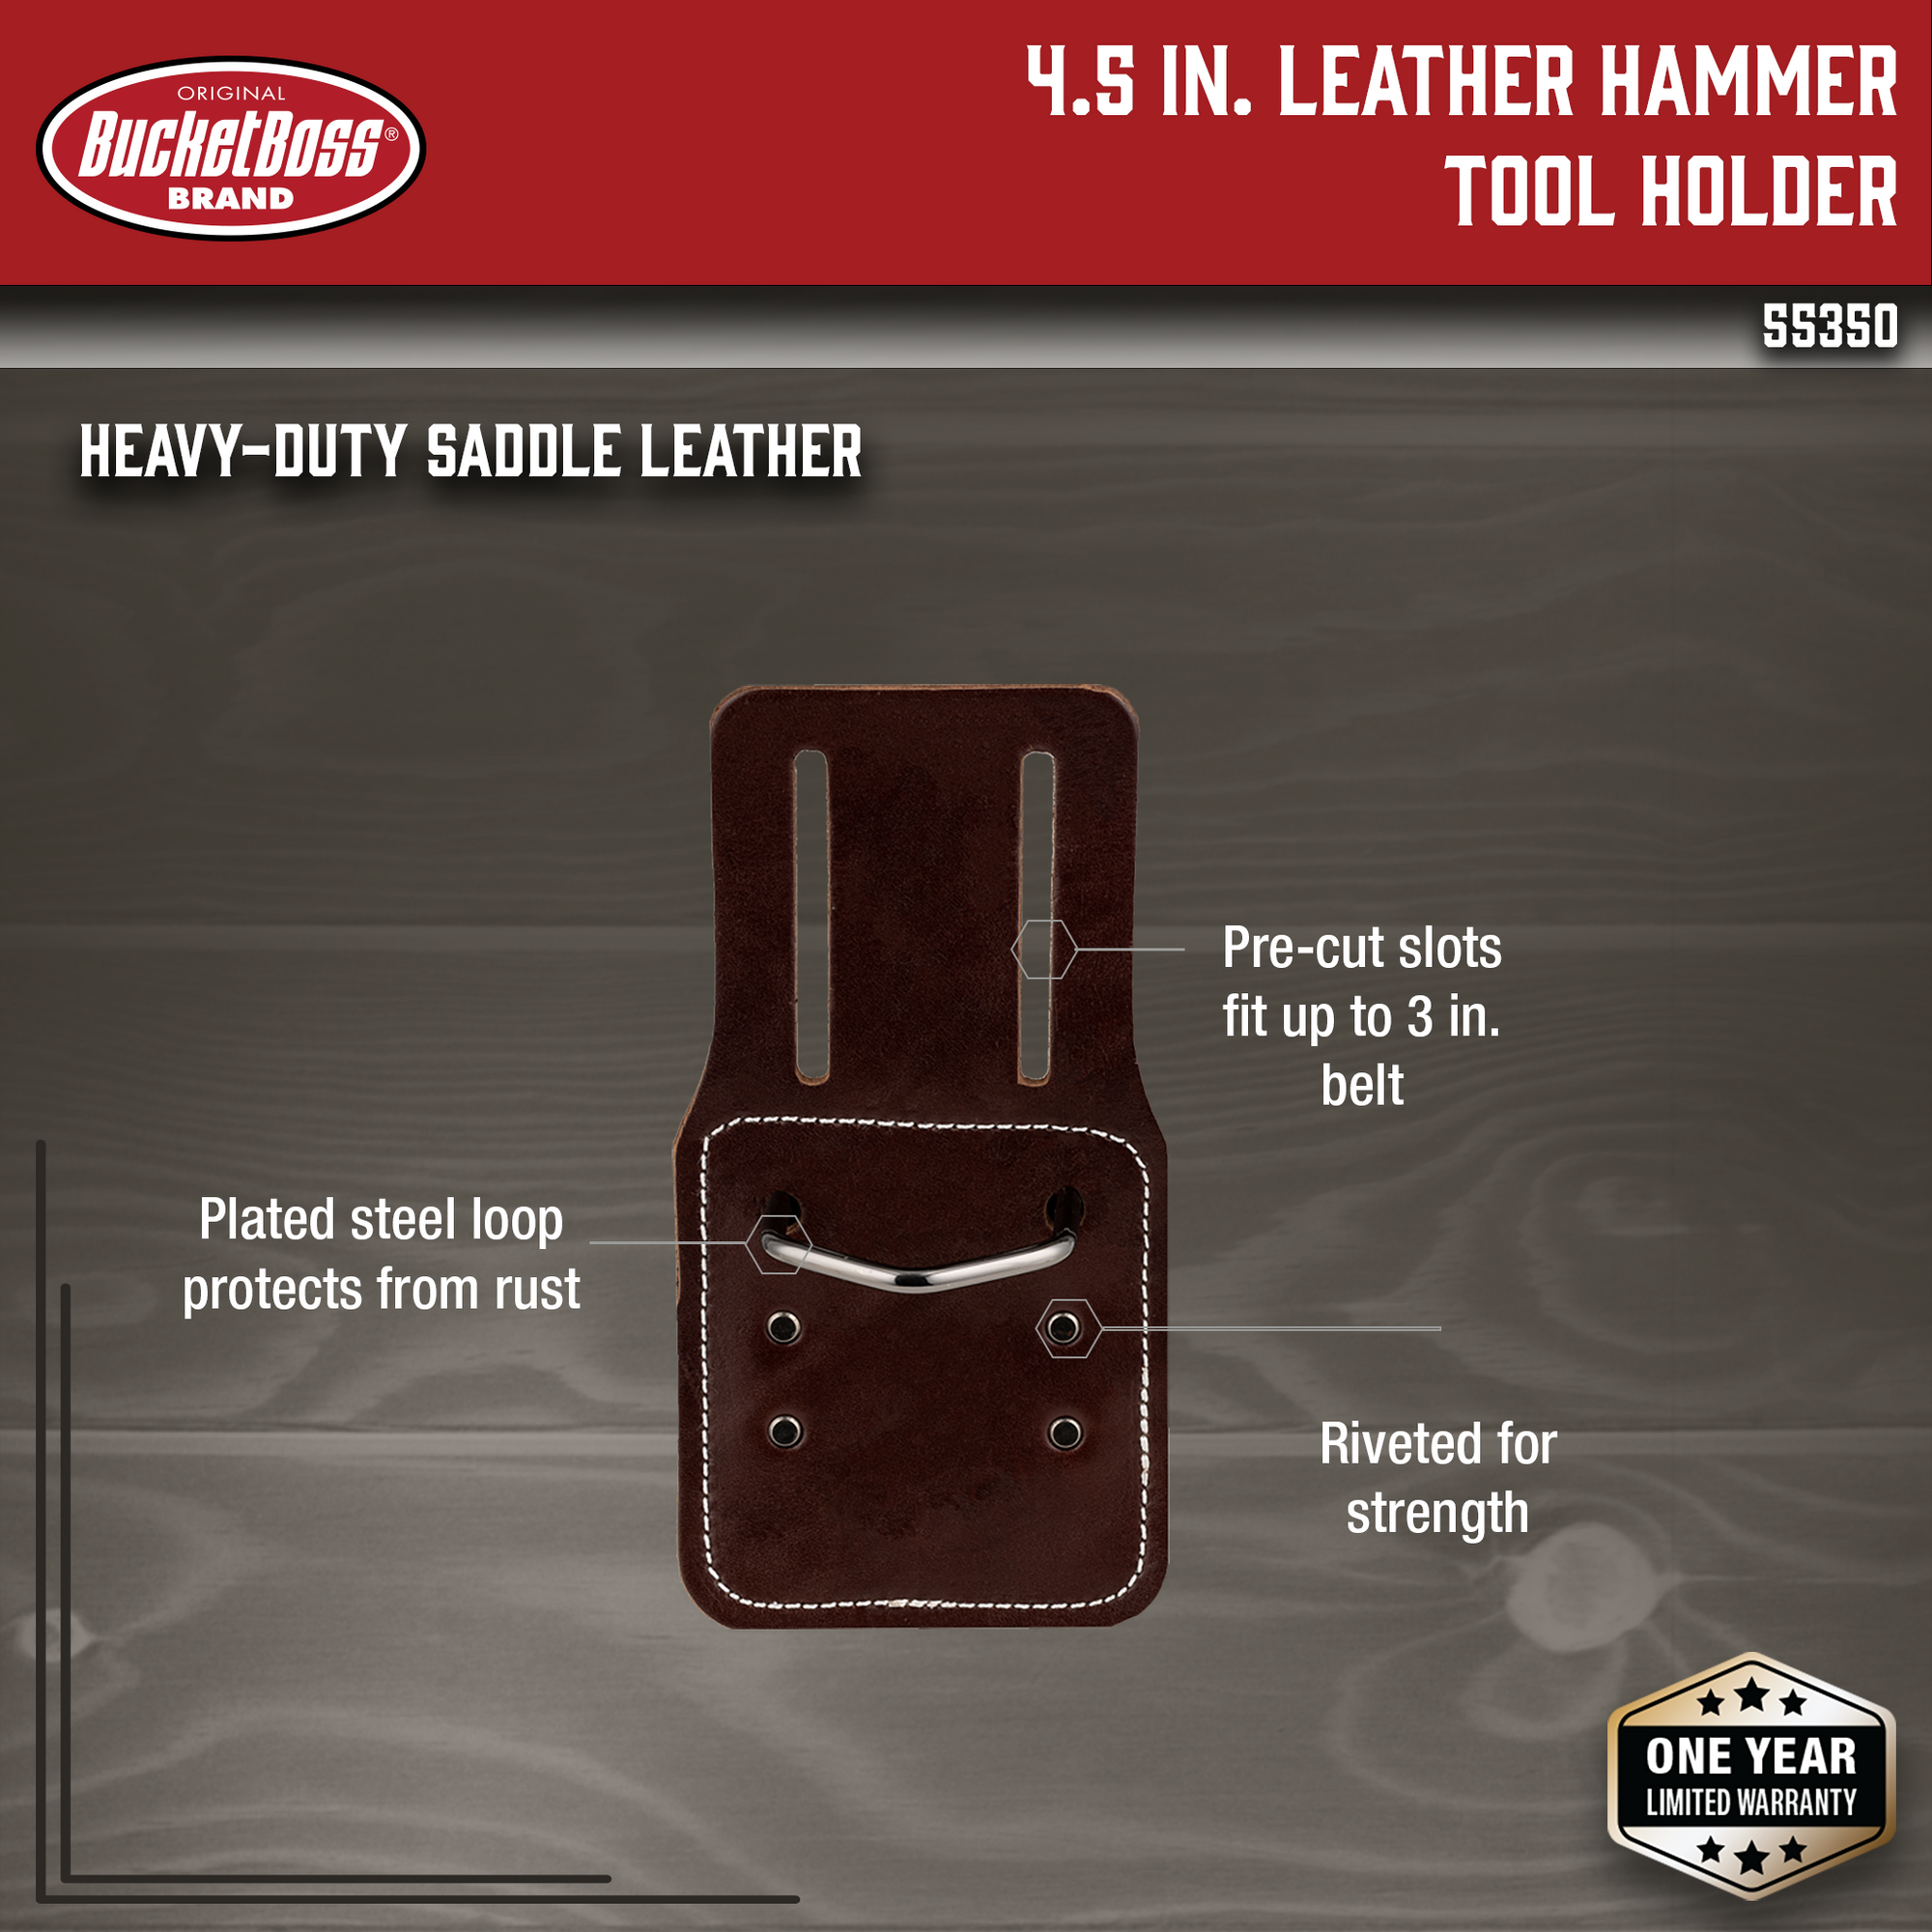 4.5 in. Leather Hammer Tool Holder